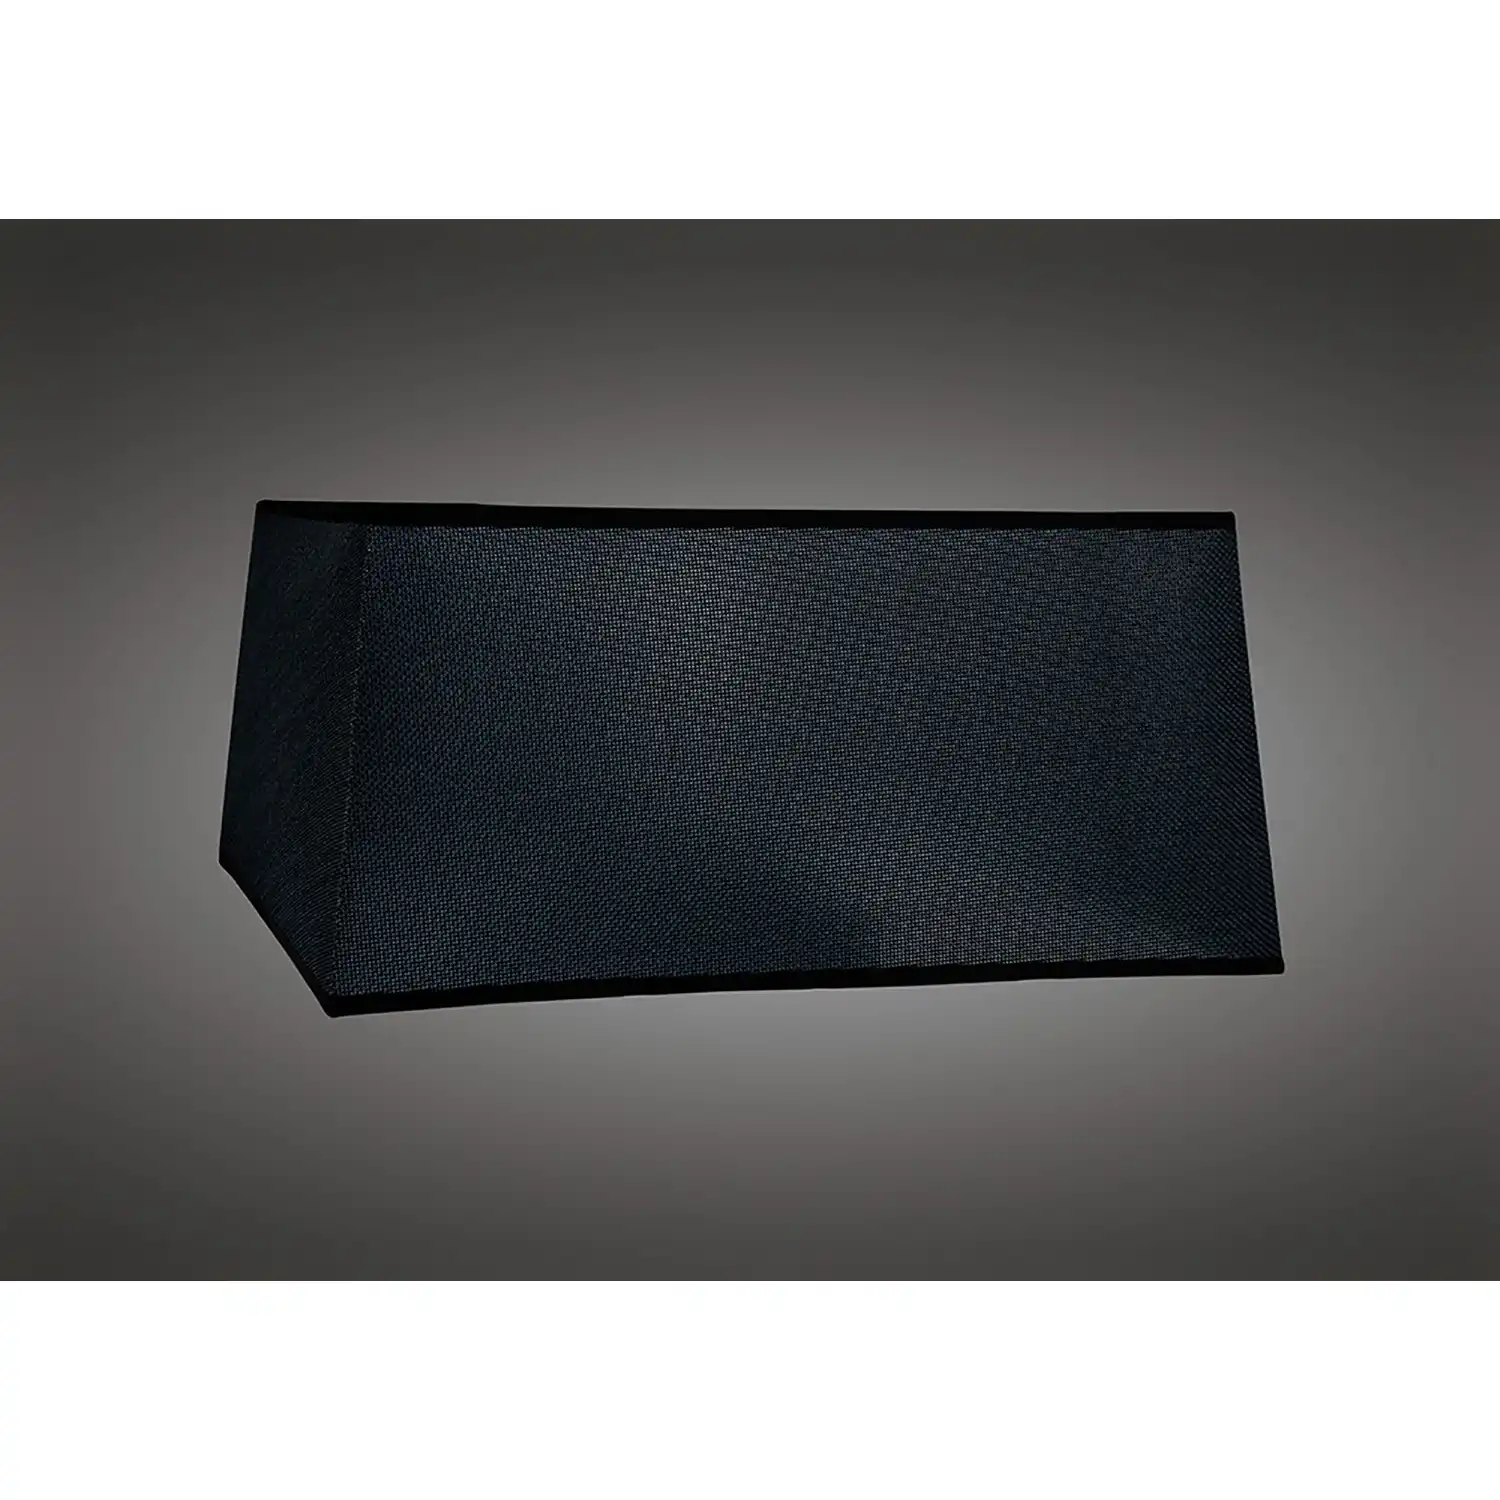 Habana Black Square Shade, 450 450x215mm, Suitable for Pendant Lights